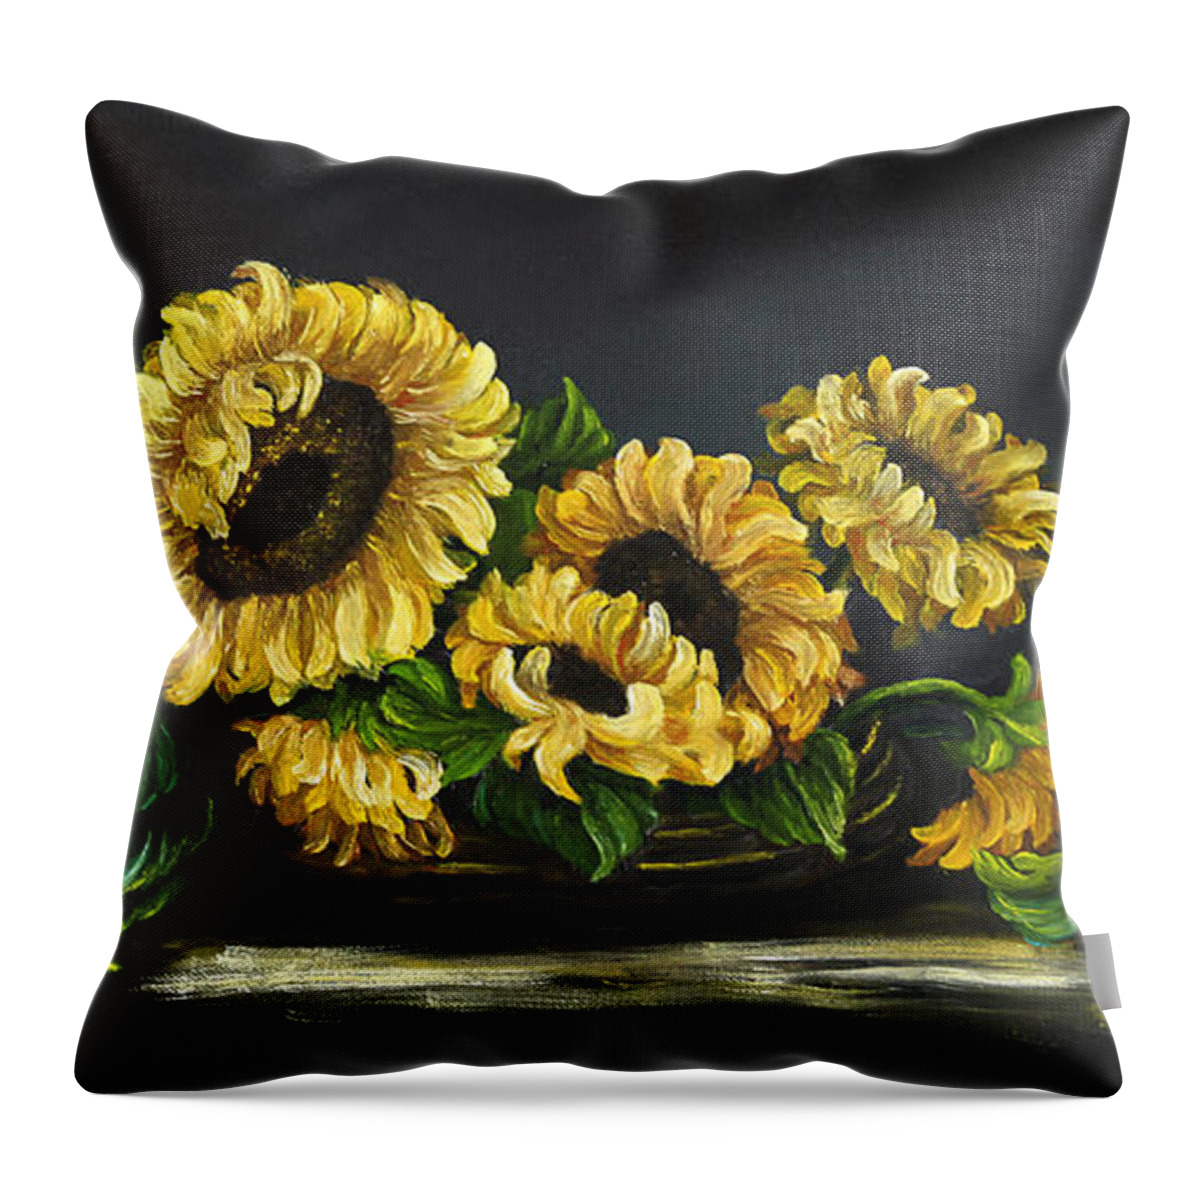 Flowers Throw Pillow featuring the painting Sunflowers From The Garden by Johanna Lerwick